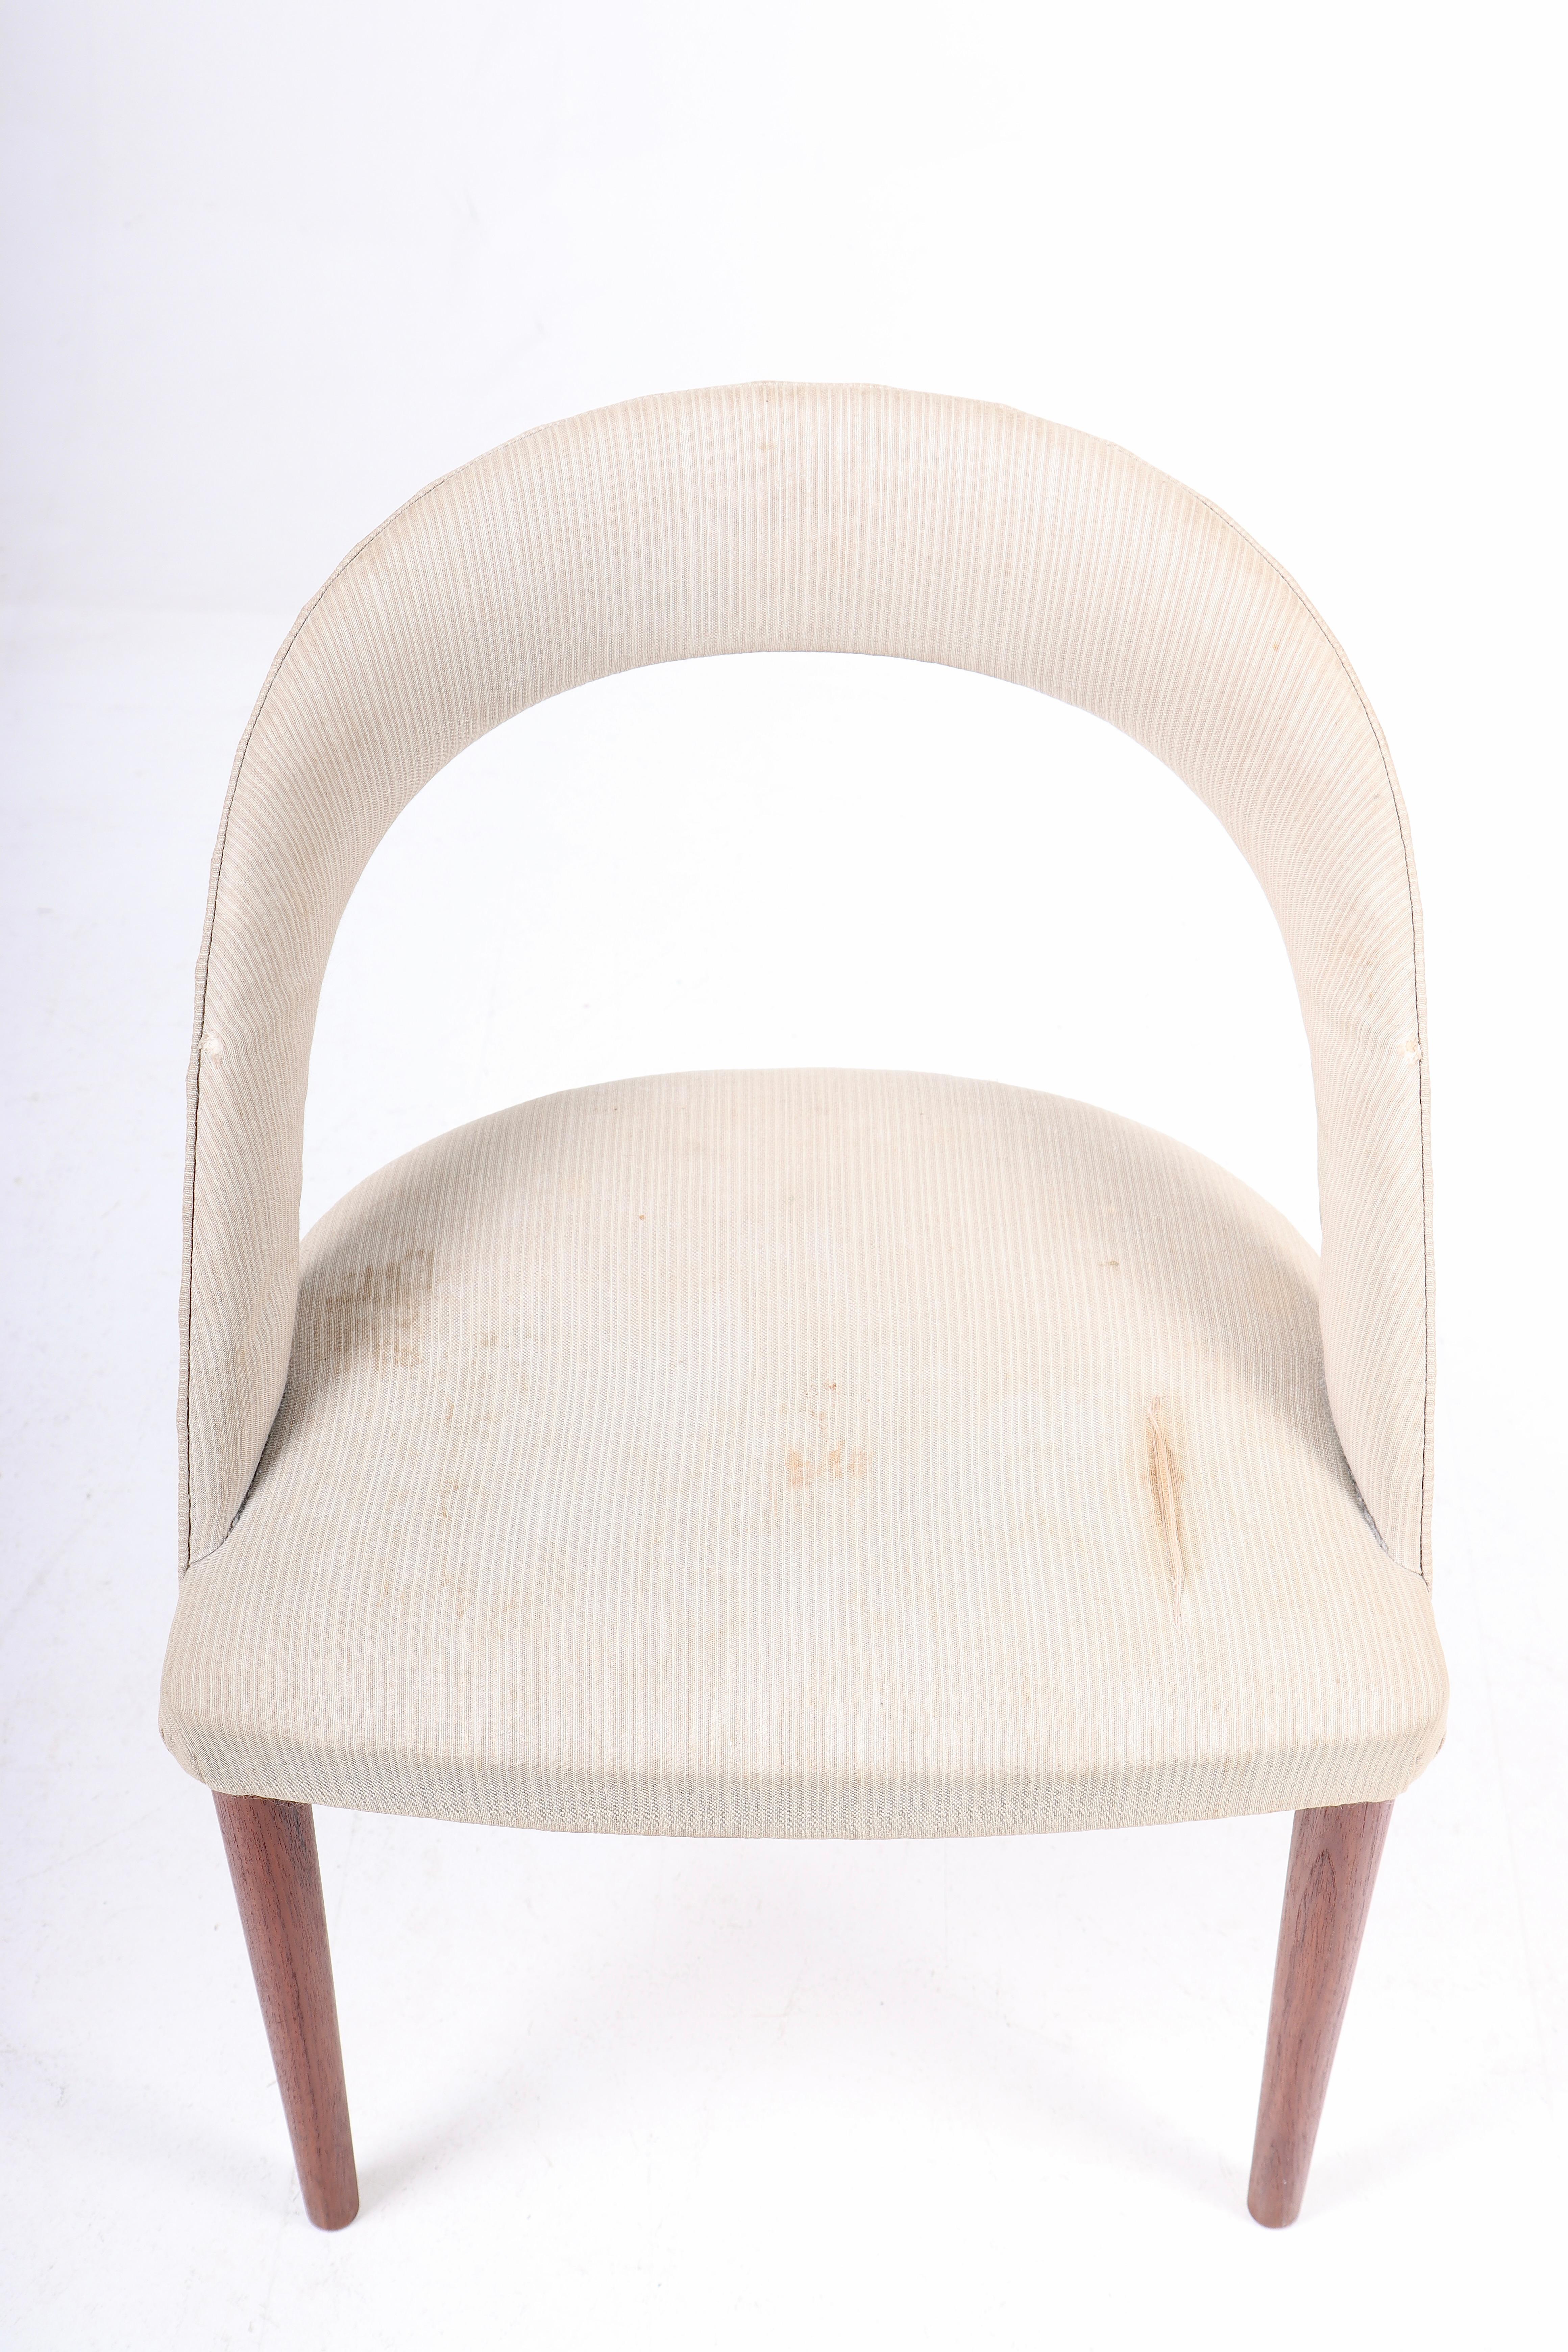 Scandinavian Modern Mid-Century Side Chair by Frode Holm, 1950s For Sale